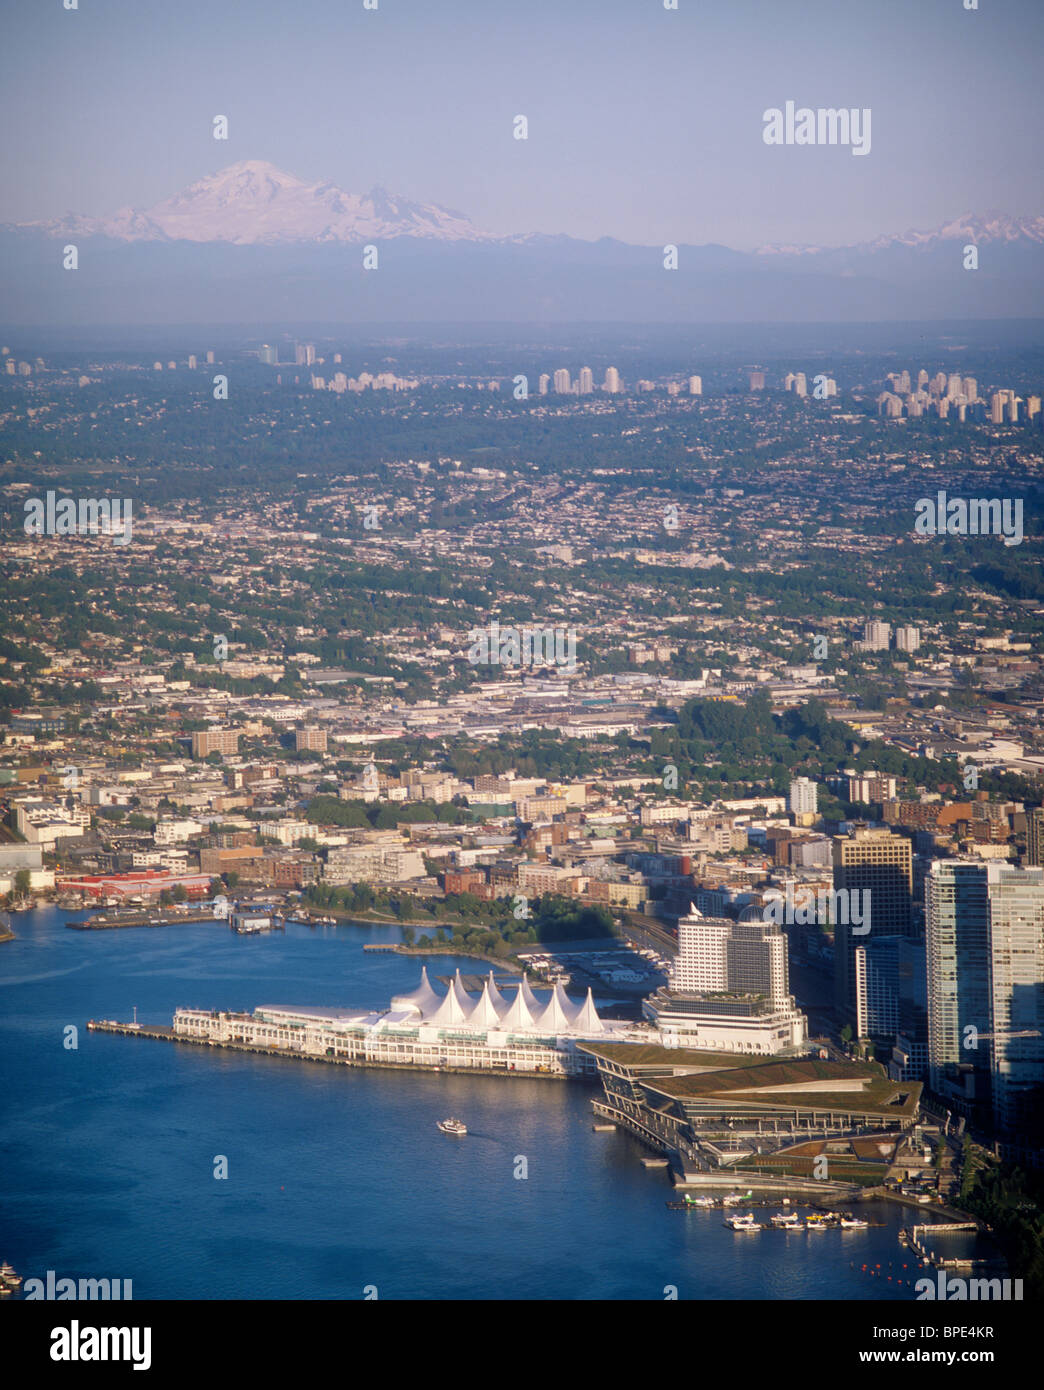 Canada Place, Cruise Ship Terminal, Convention Center, Coal Harbour, Flaot Planes, Port of Vancouver Stock Photo